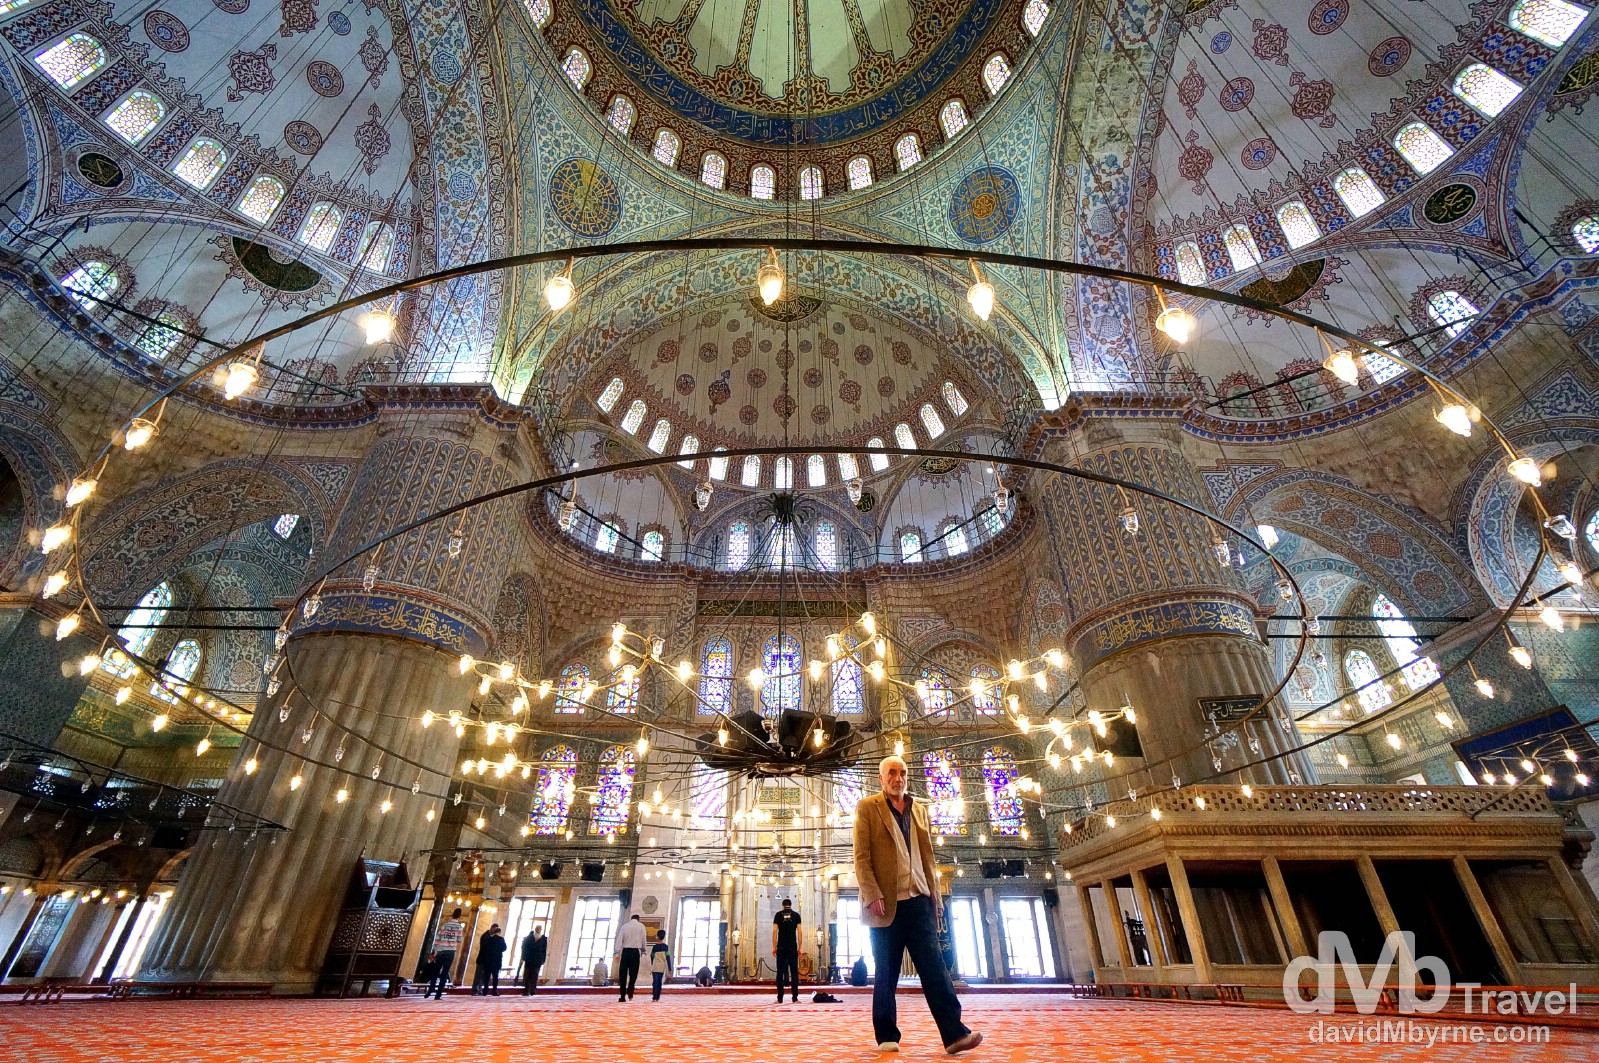 The Sultan Ahmed Mosque, aka The Blue Mosque, Istanbul, Turkey. April 10th, 2014.